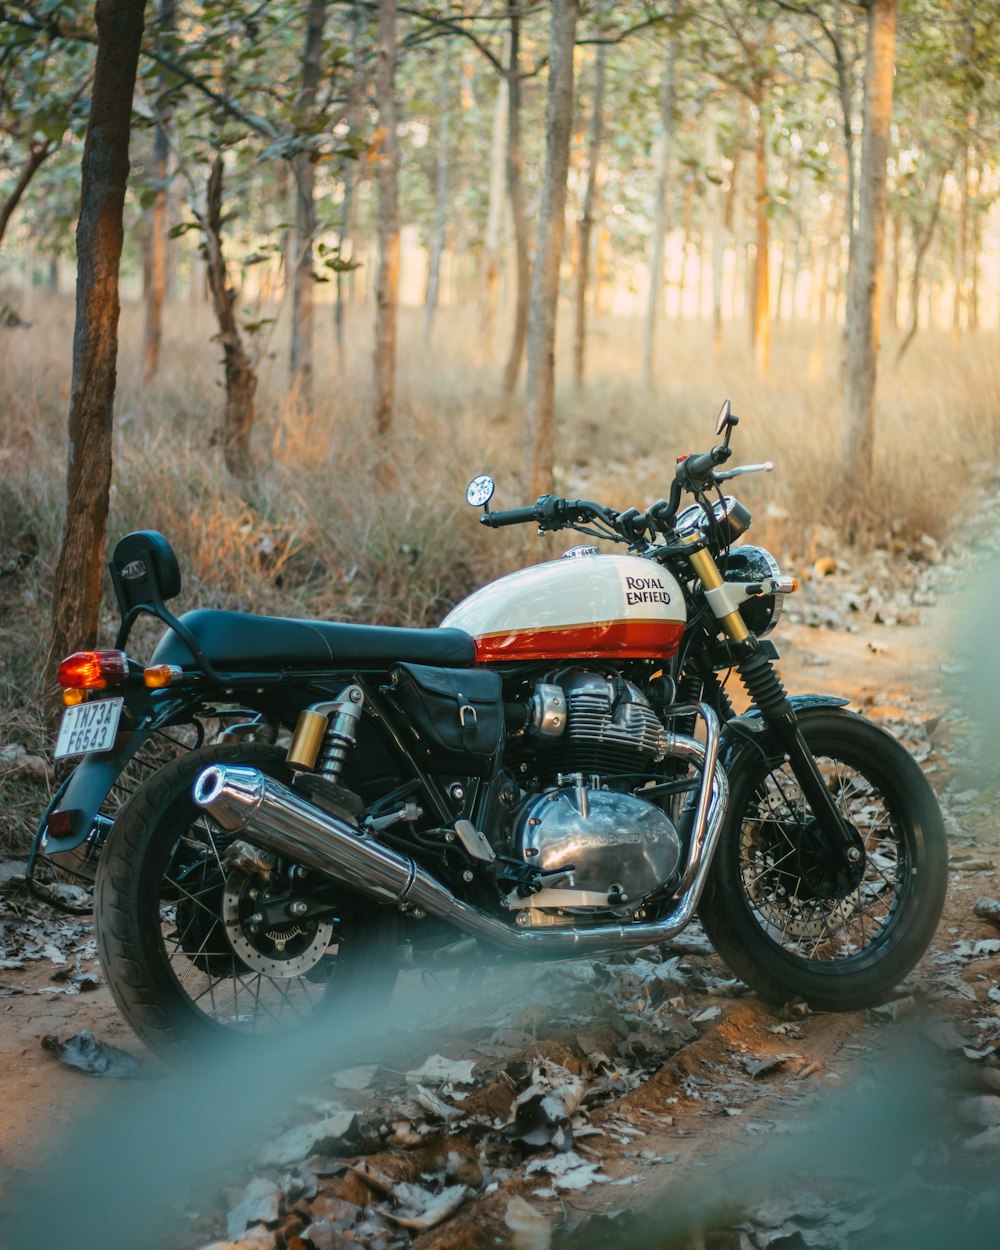 a motorcycle parked on a dirt road in the woods